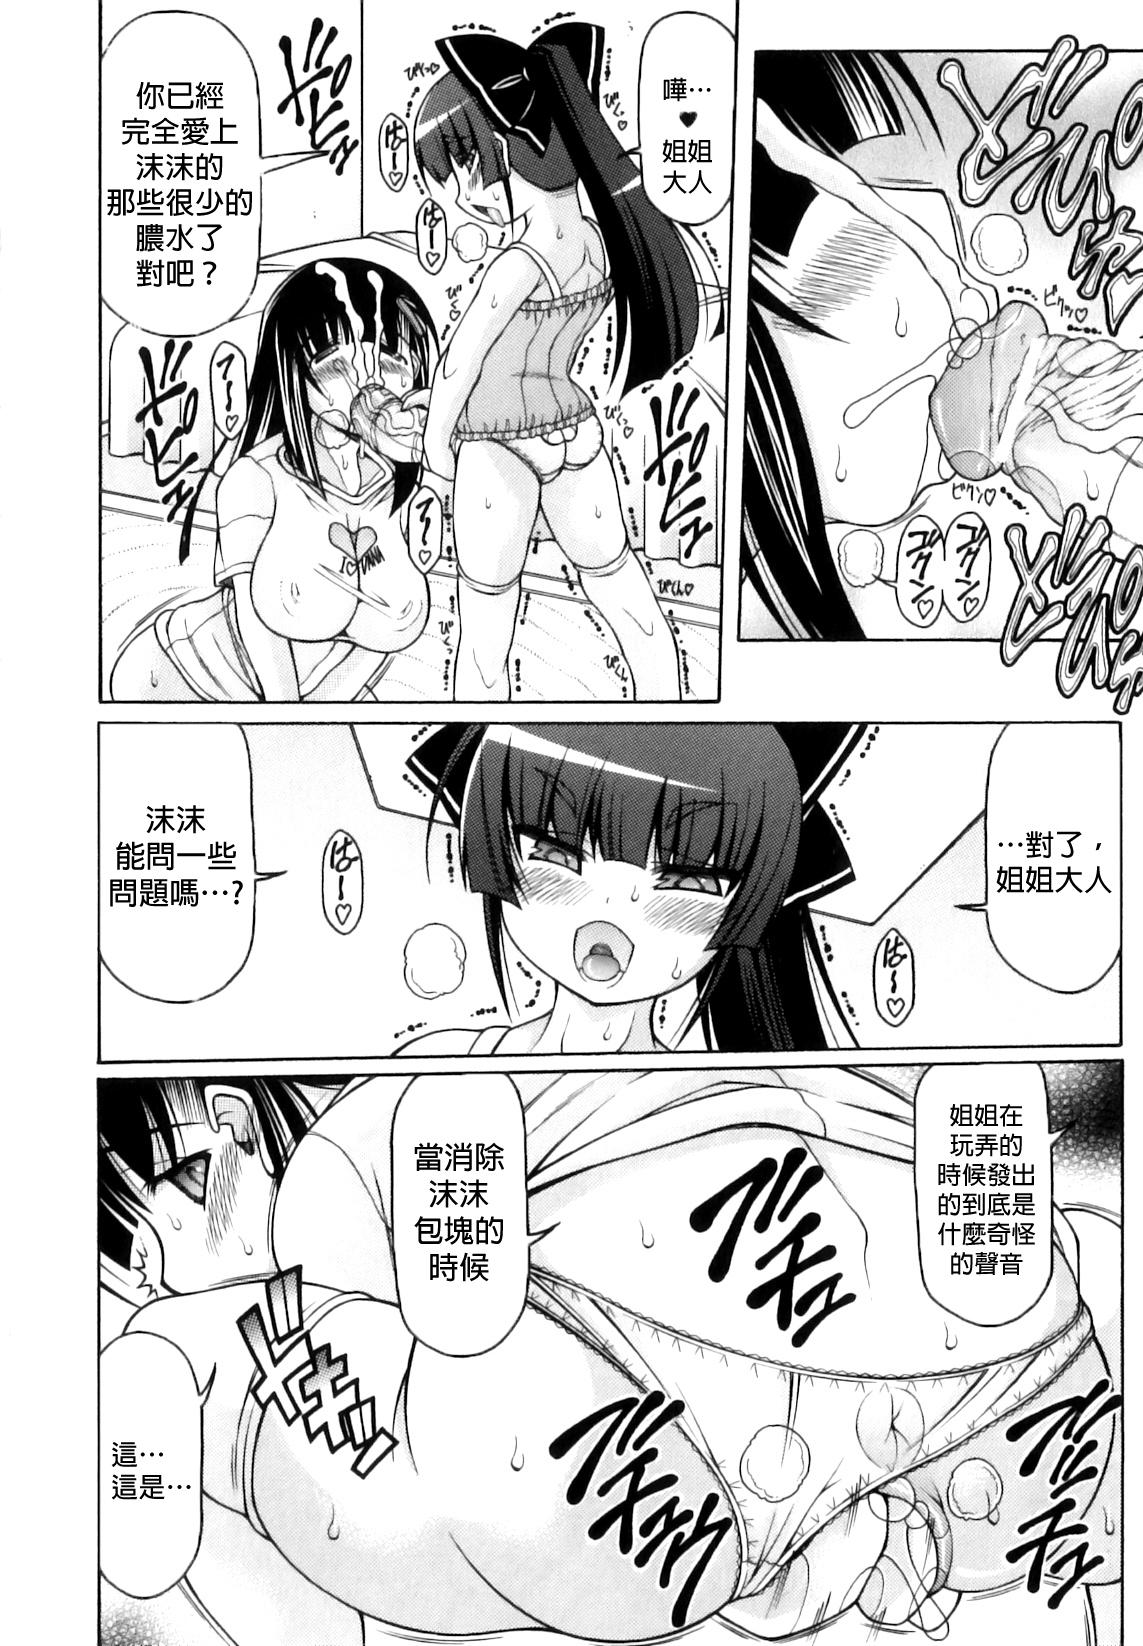 Slapping Odeki no Chiryouhou | The Cure for Pimples Dutch - Page 6